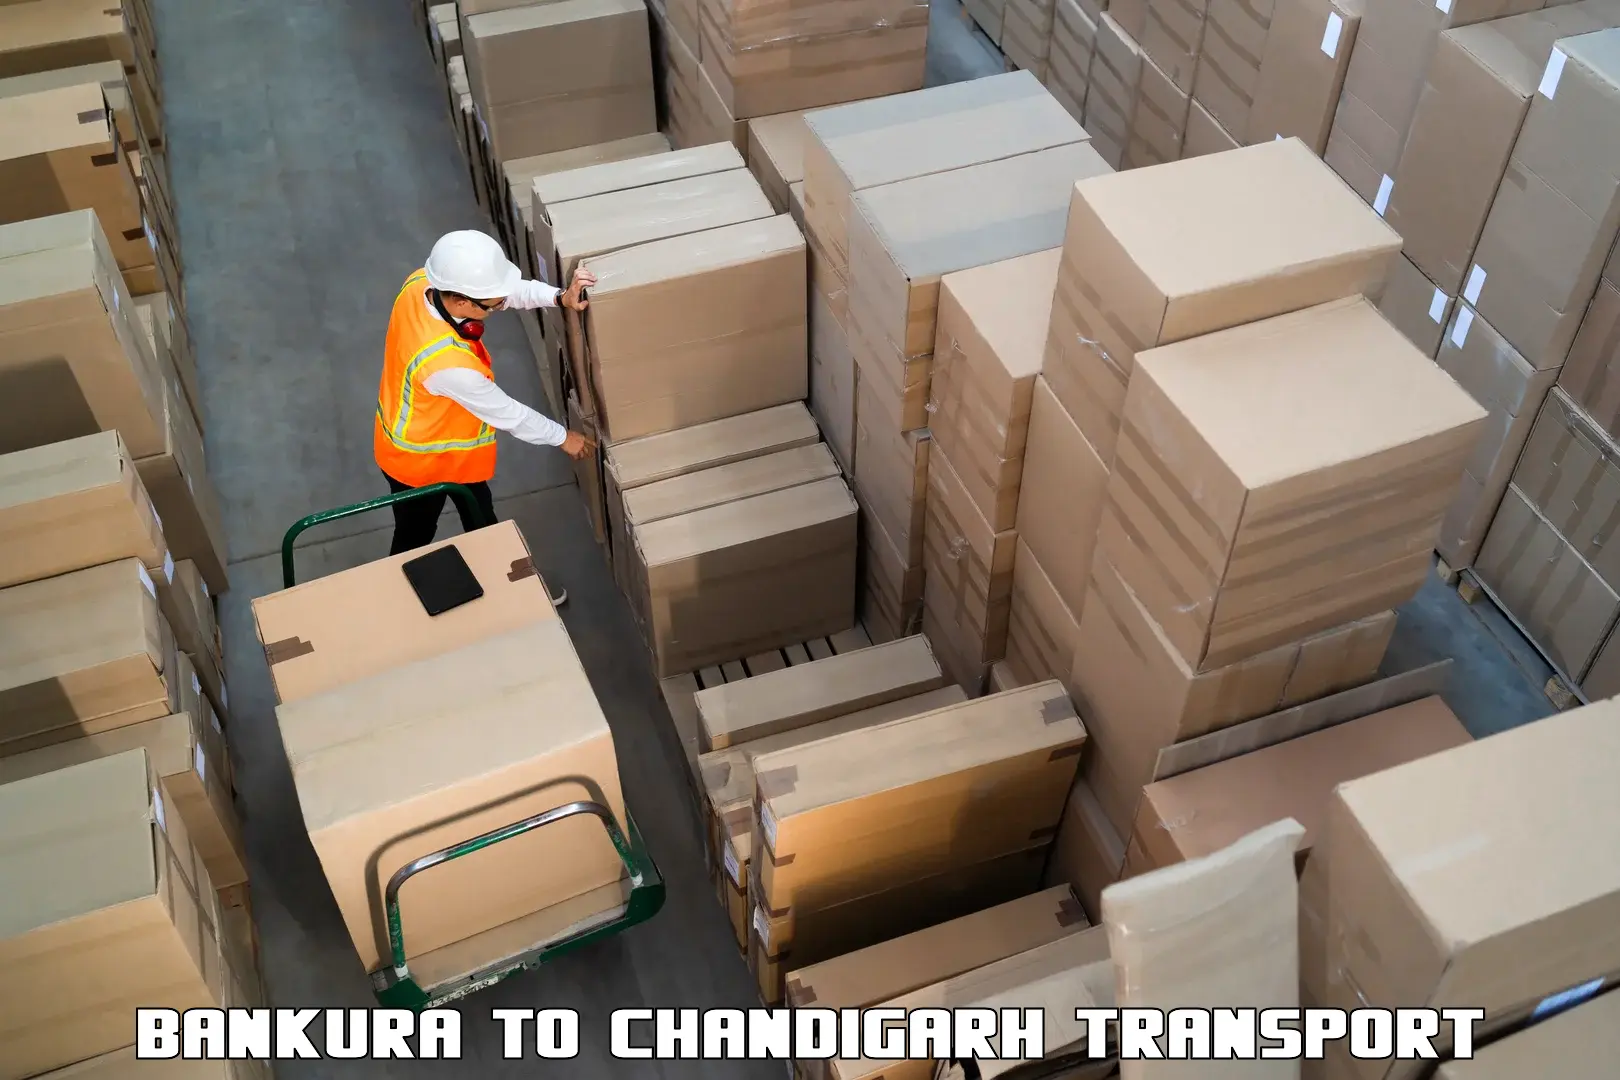 Daily parcel service transport Bankura to Chandigarh